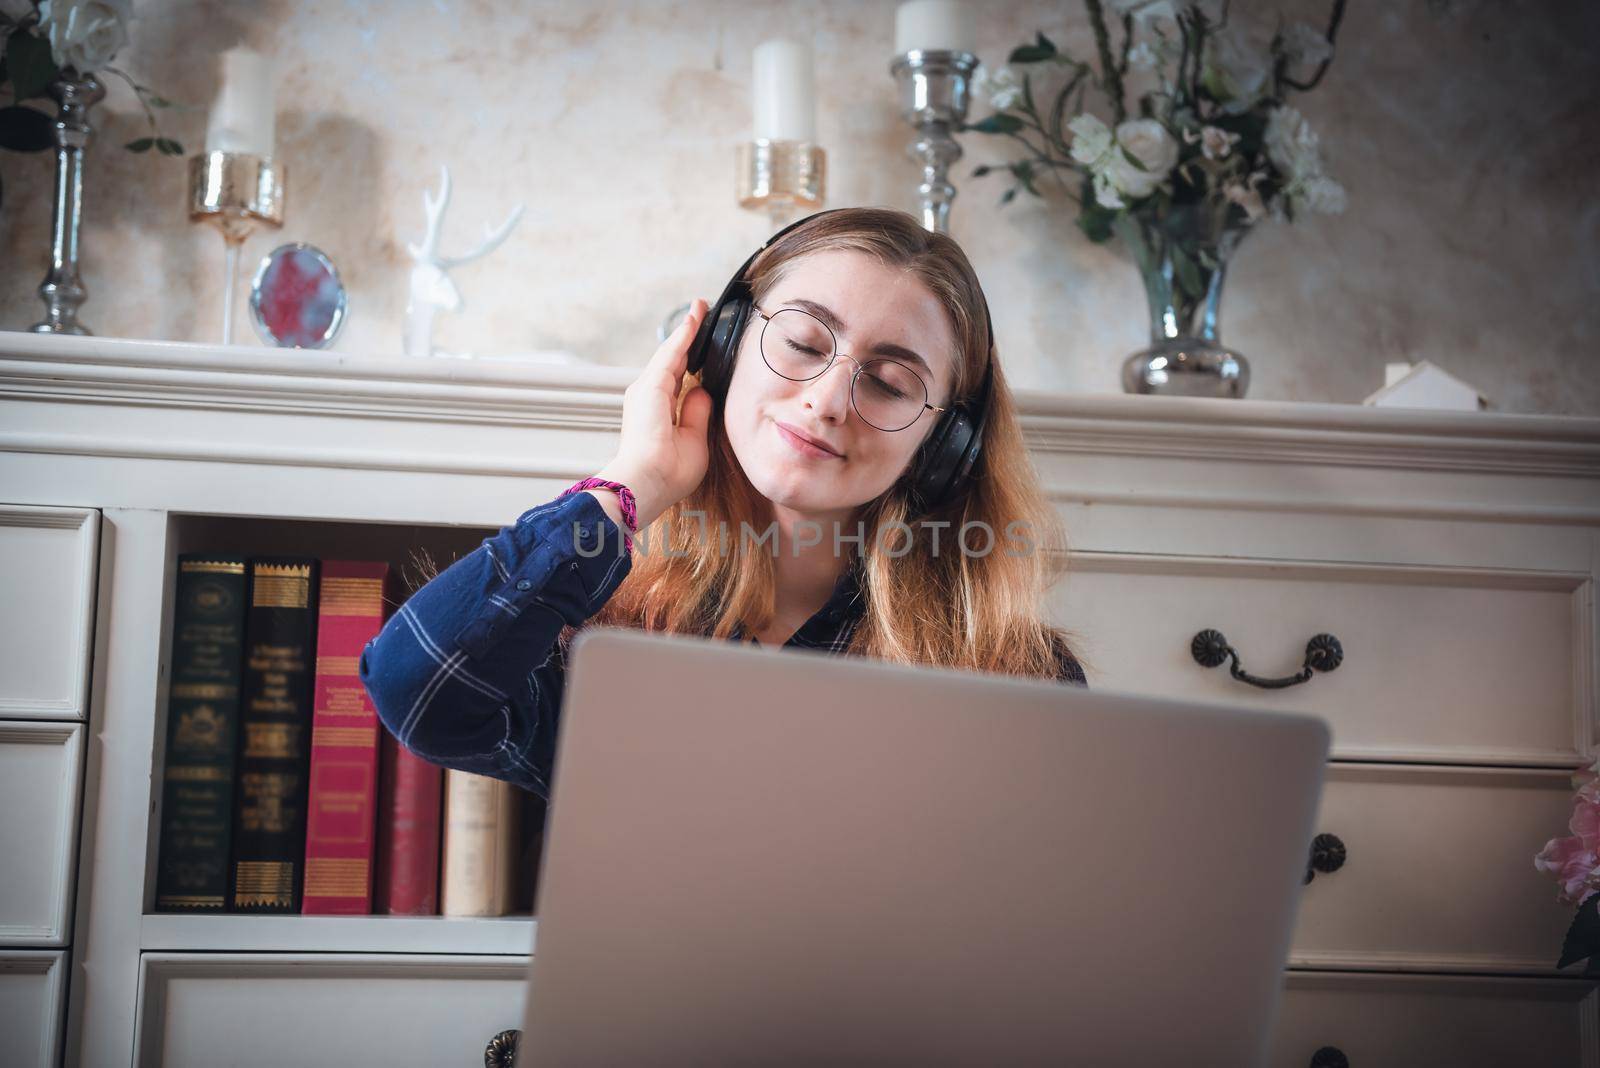 Leisure Activity and Home Relaxing Lifestyle Concept, Attractive Woman Having Enjoyment While Listening Music Songs Via Headphone on Laptop in Living Room. Relaxation Pursuit Entertainment at Home by MahaHeang245789